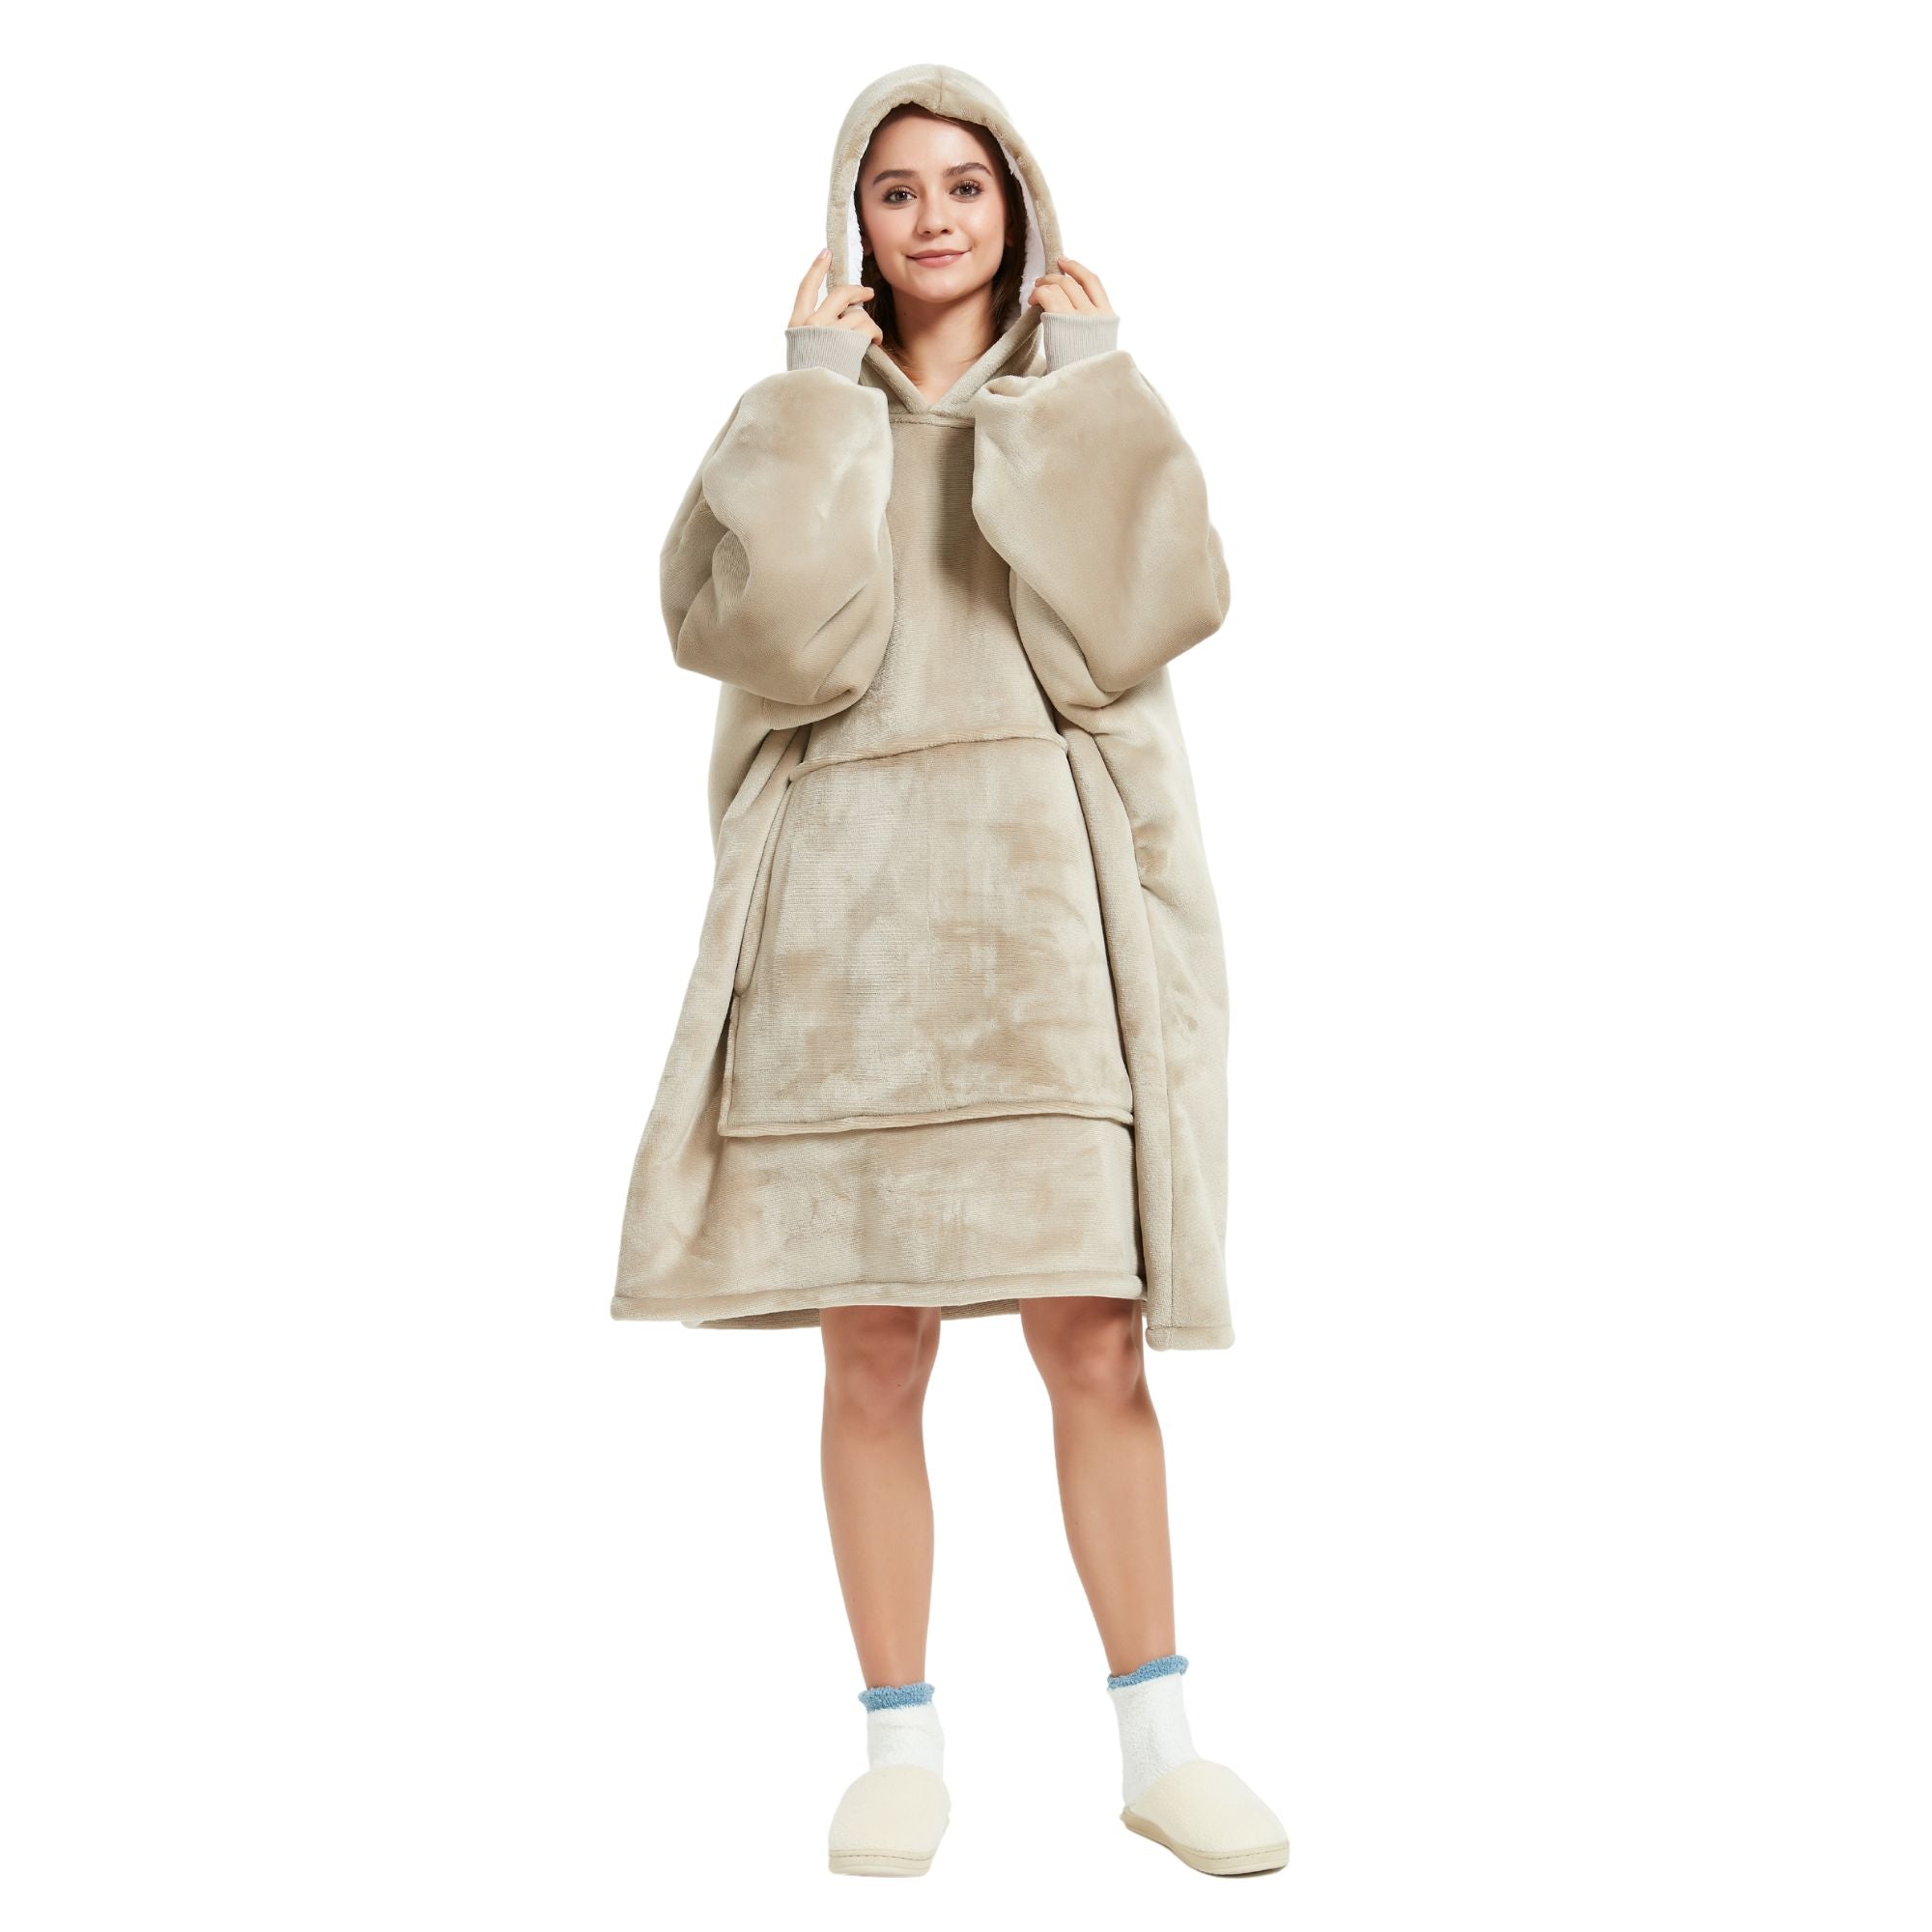 The Oversized Hoodie® beige soft cosy comfy sweet 